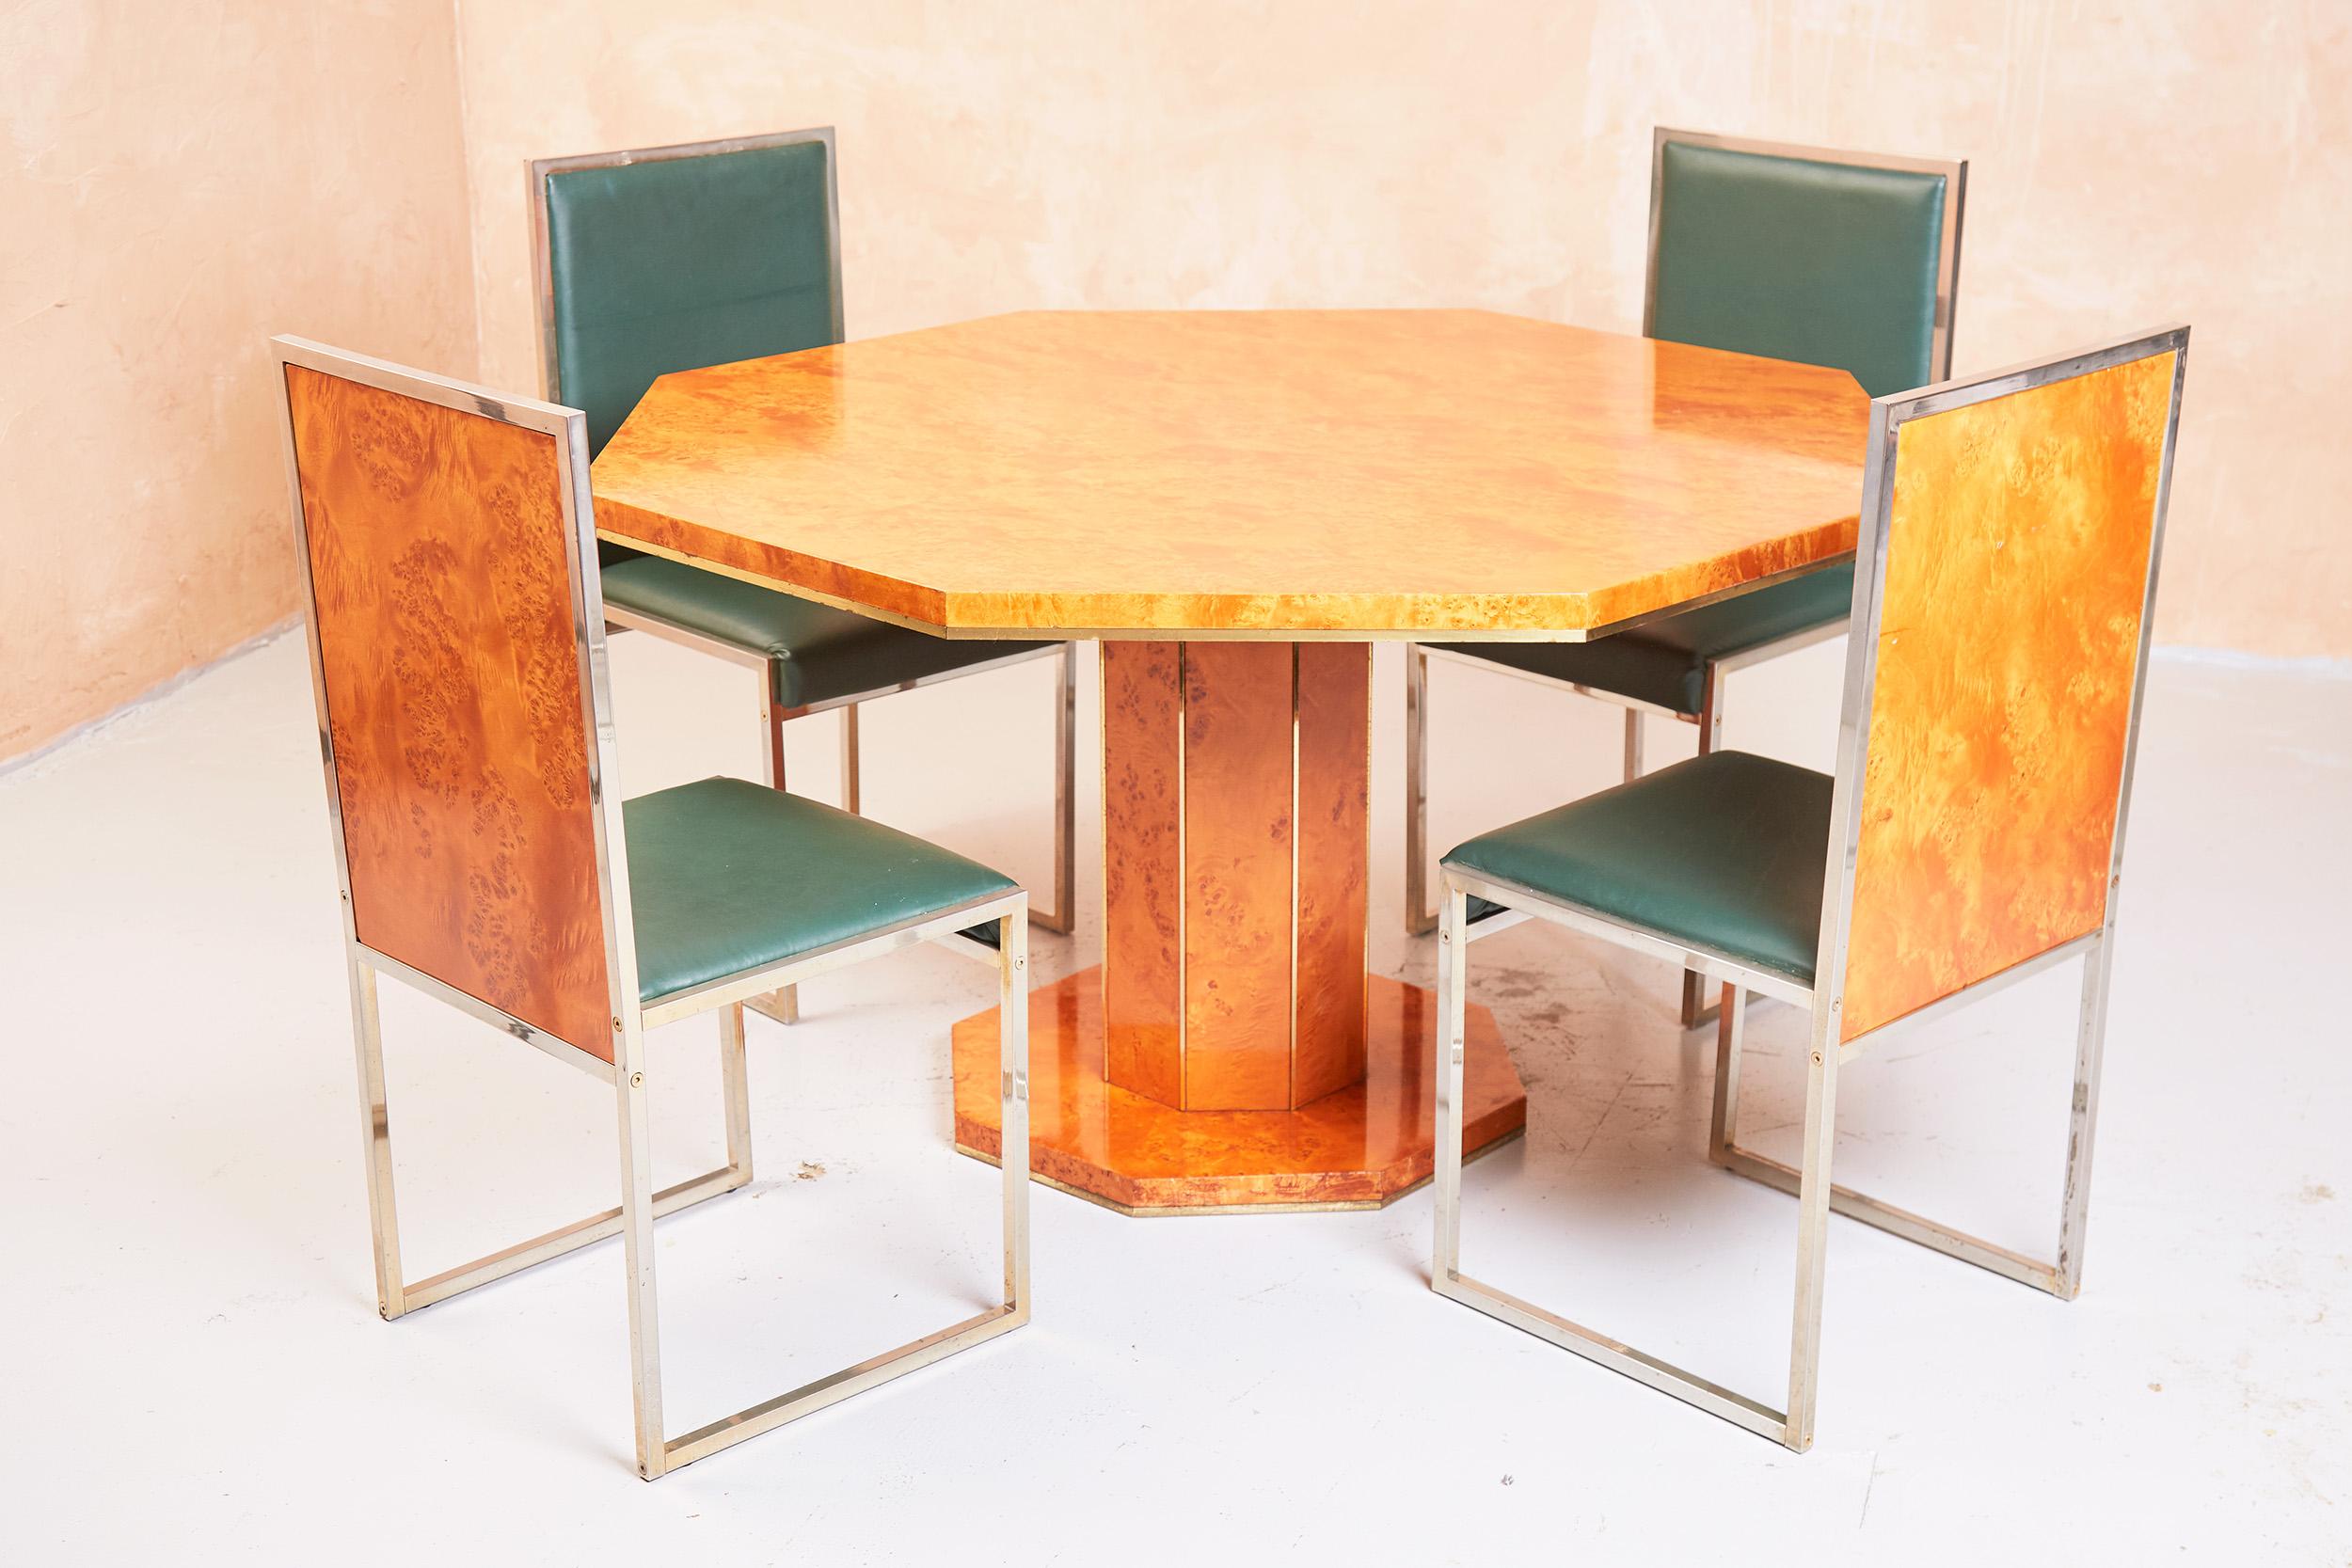 Polished Italian Art Deco Dining Table and Chairs by Fratelli Orsenigo in Maple and Brass